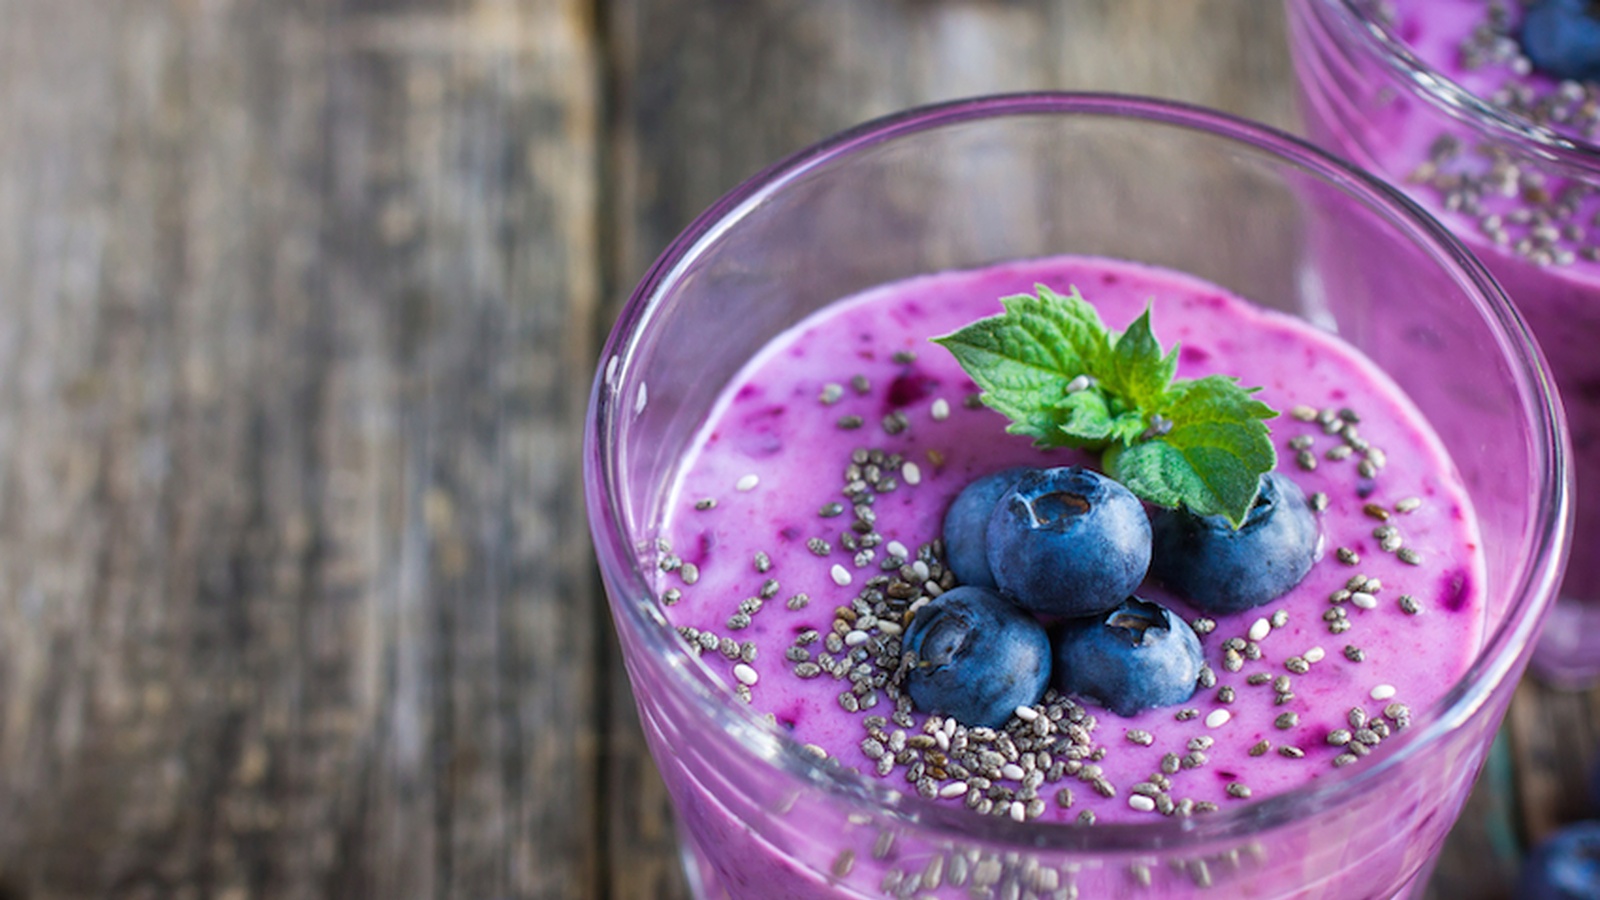 6 Foods You Should Add To Your Smoothie (That Aren't Green!)